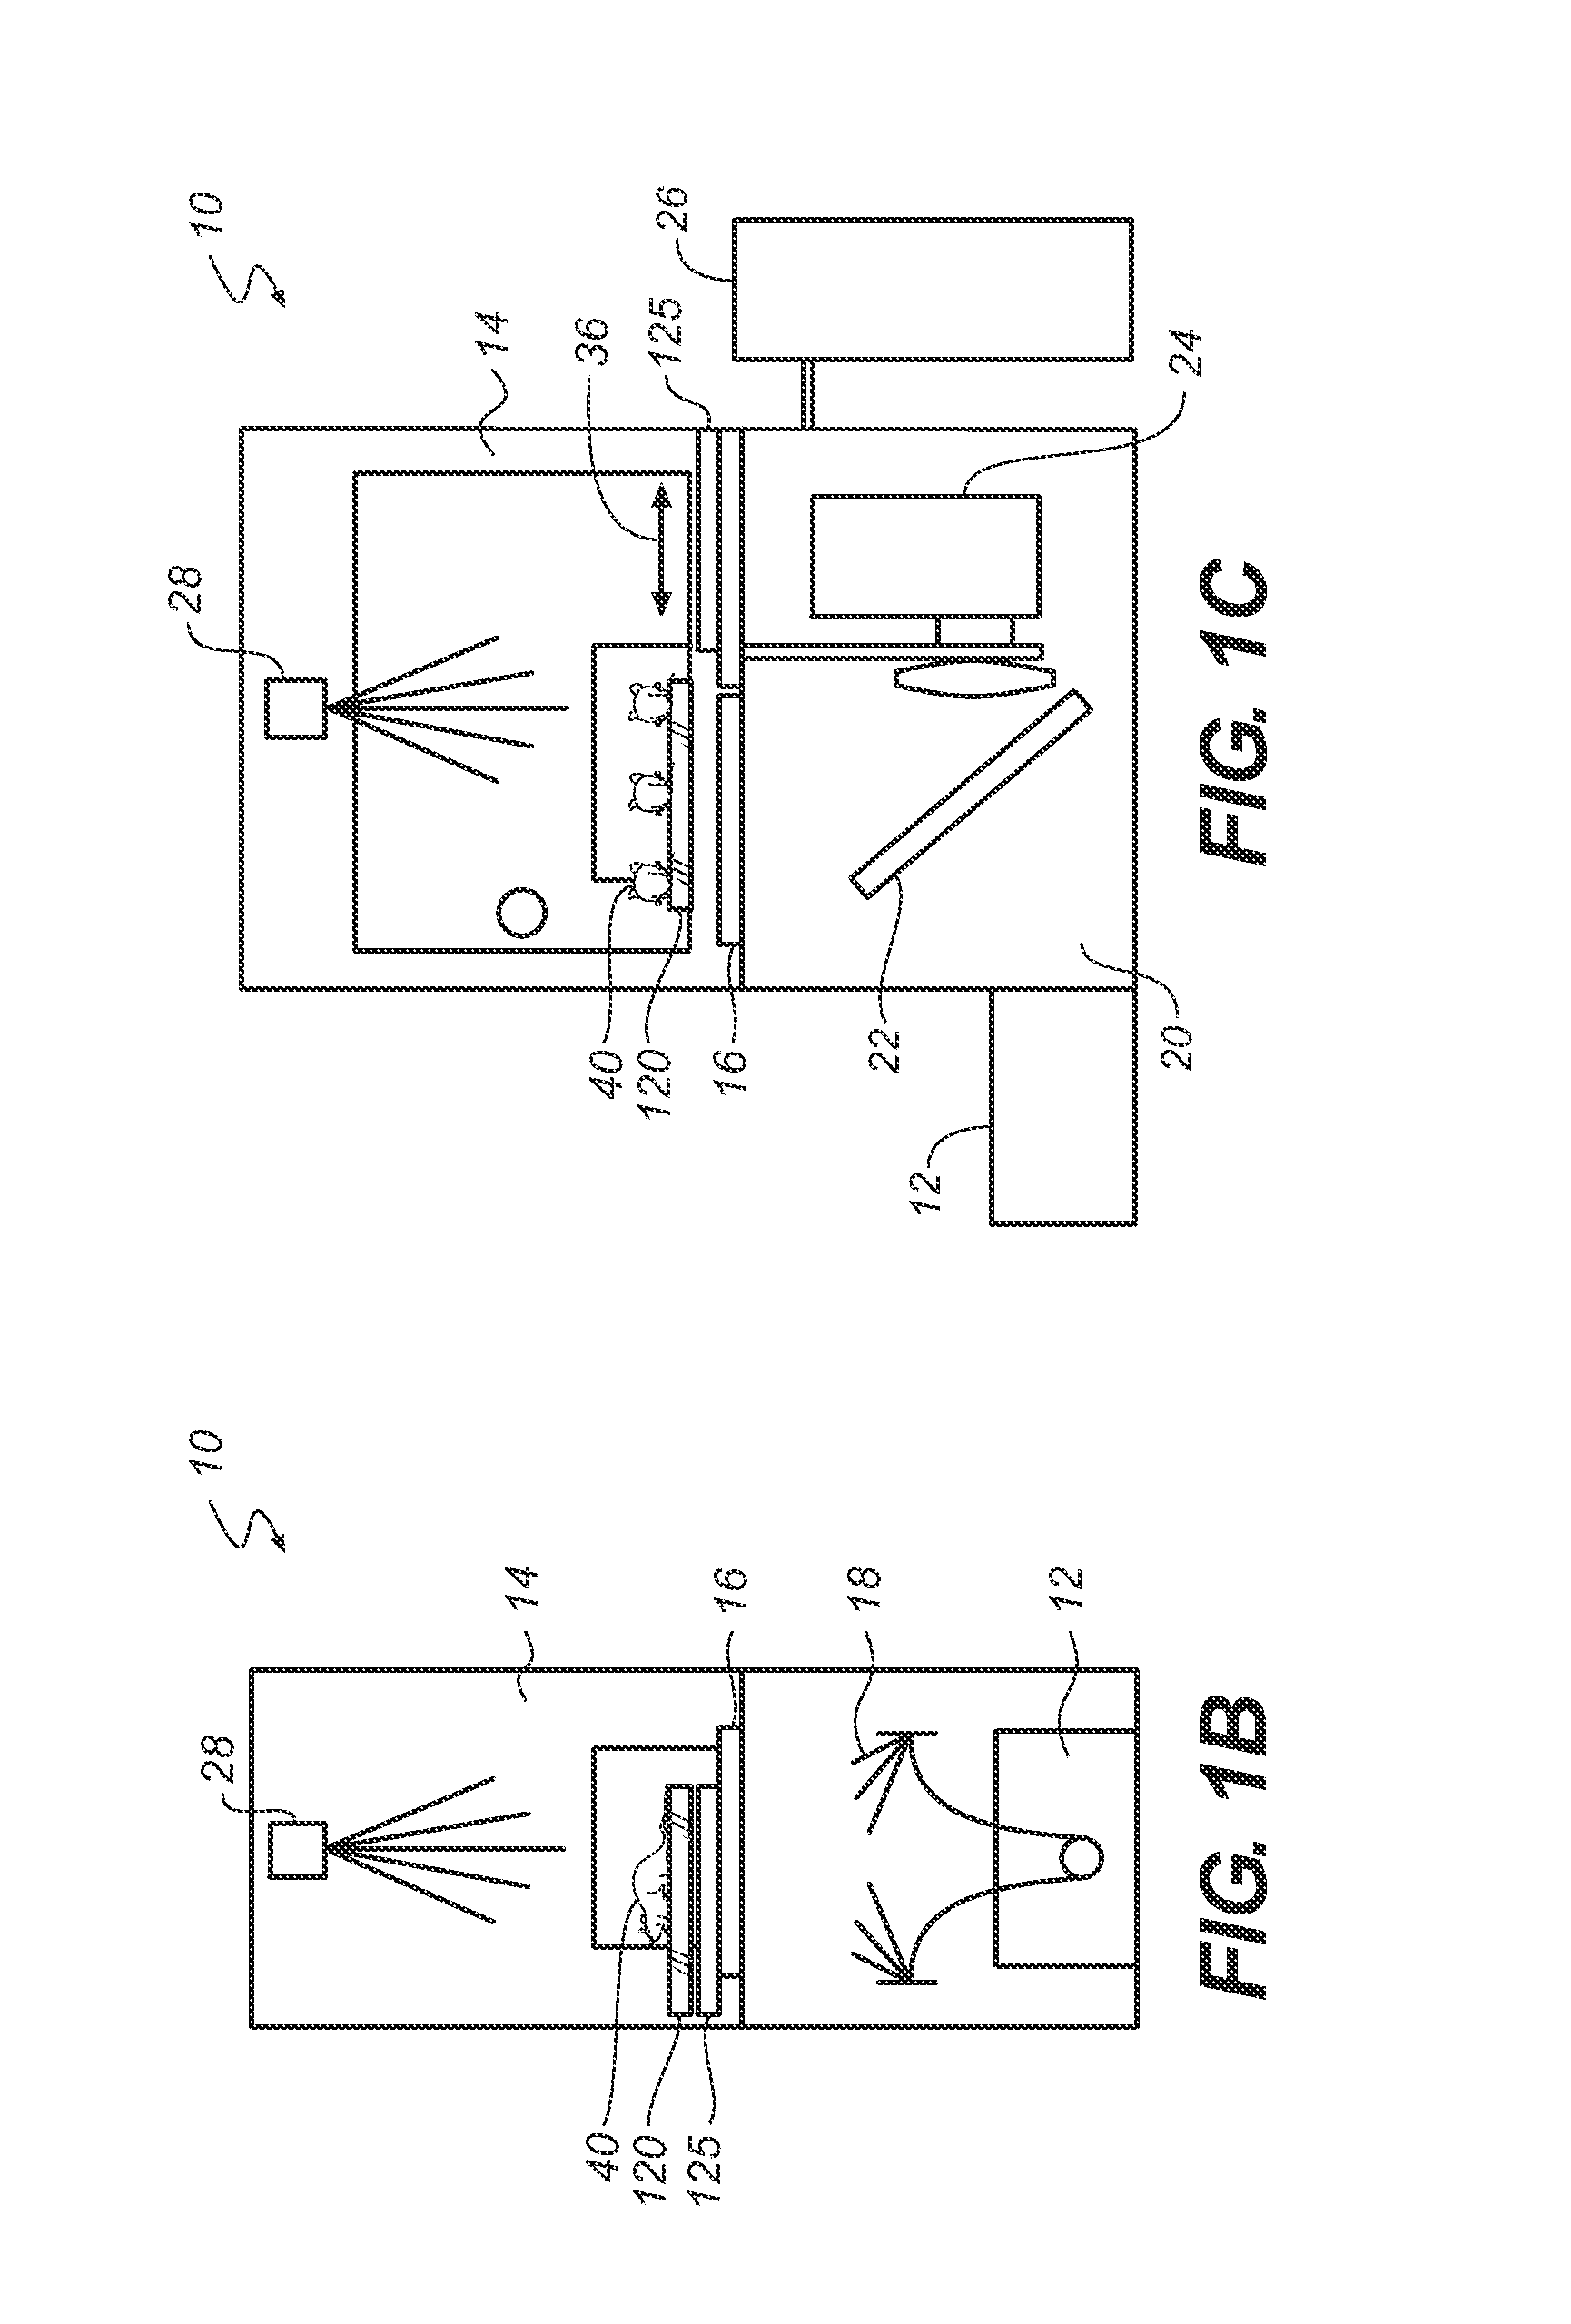 Apparatus and method for multi-modal imaging using multiple x-ray sources